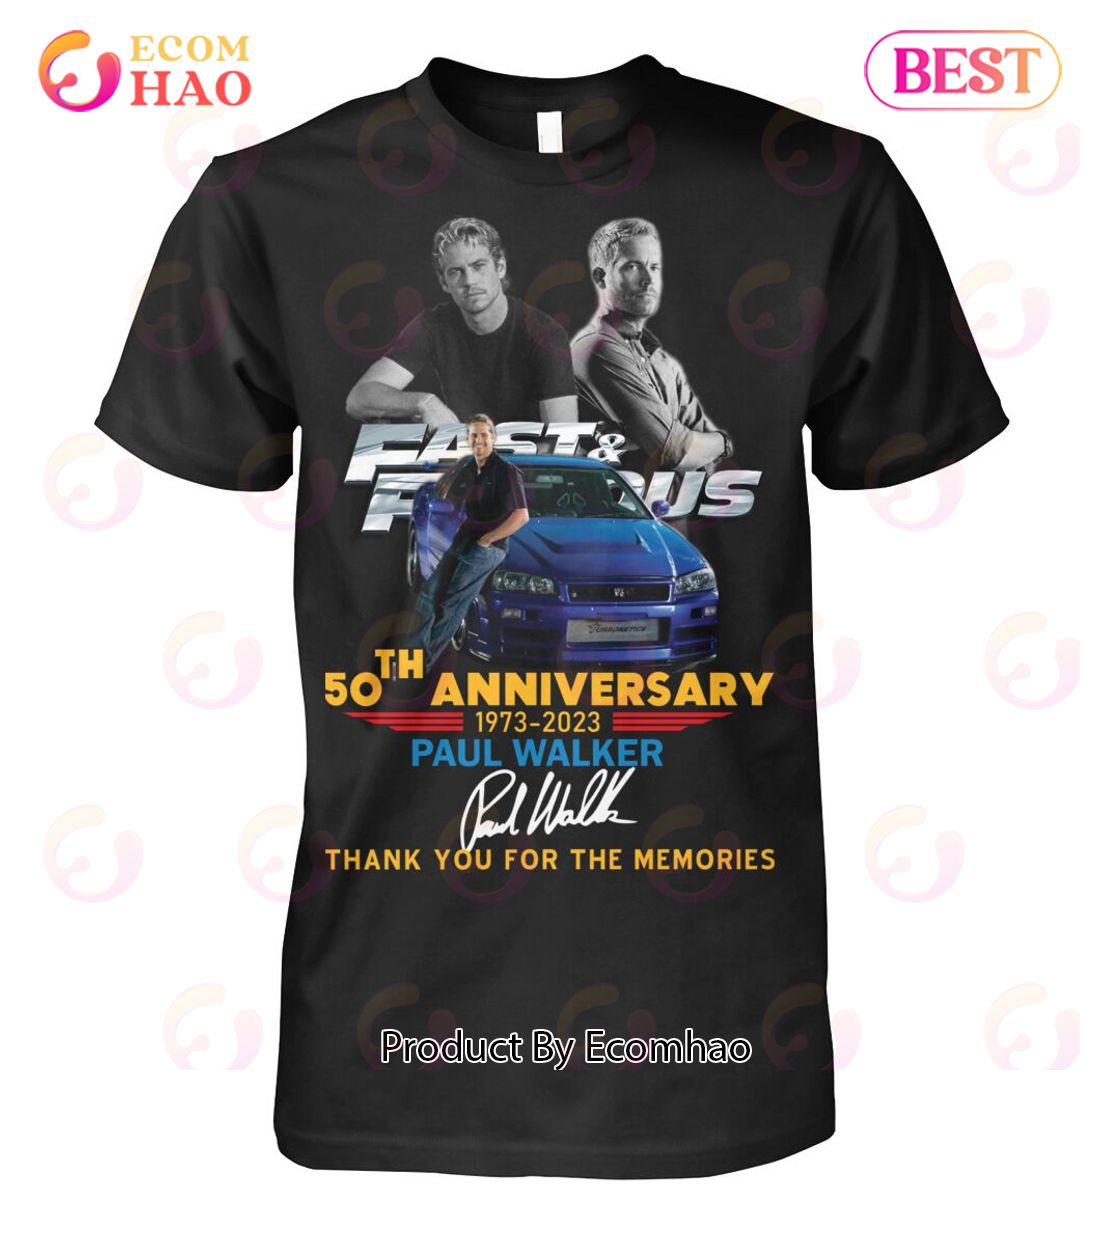 50th Anniversary 1973 - 2023 Paul Walker Thank You For The Memories T-Shirt